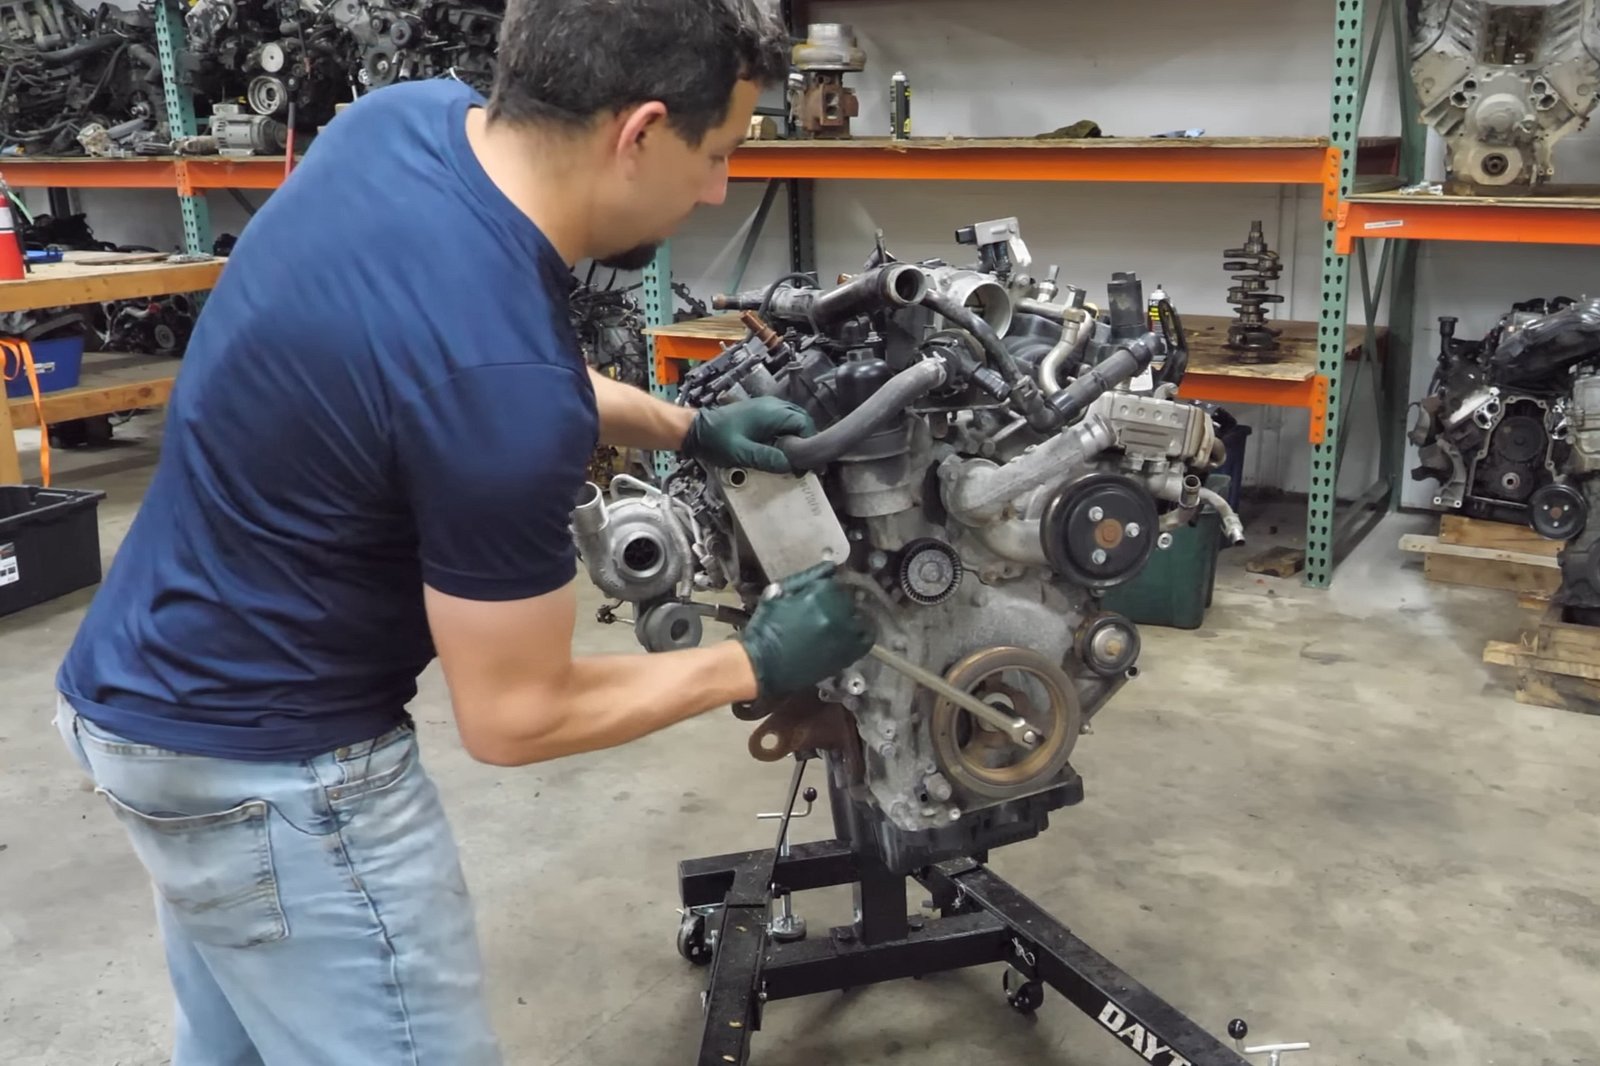 video, engine teardown shows why ford f-150's ecoboost v6 died at 96k miles